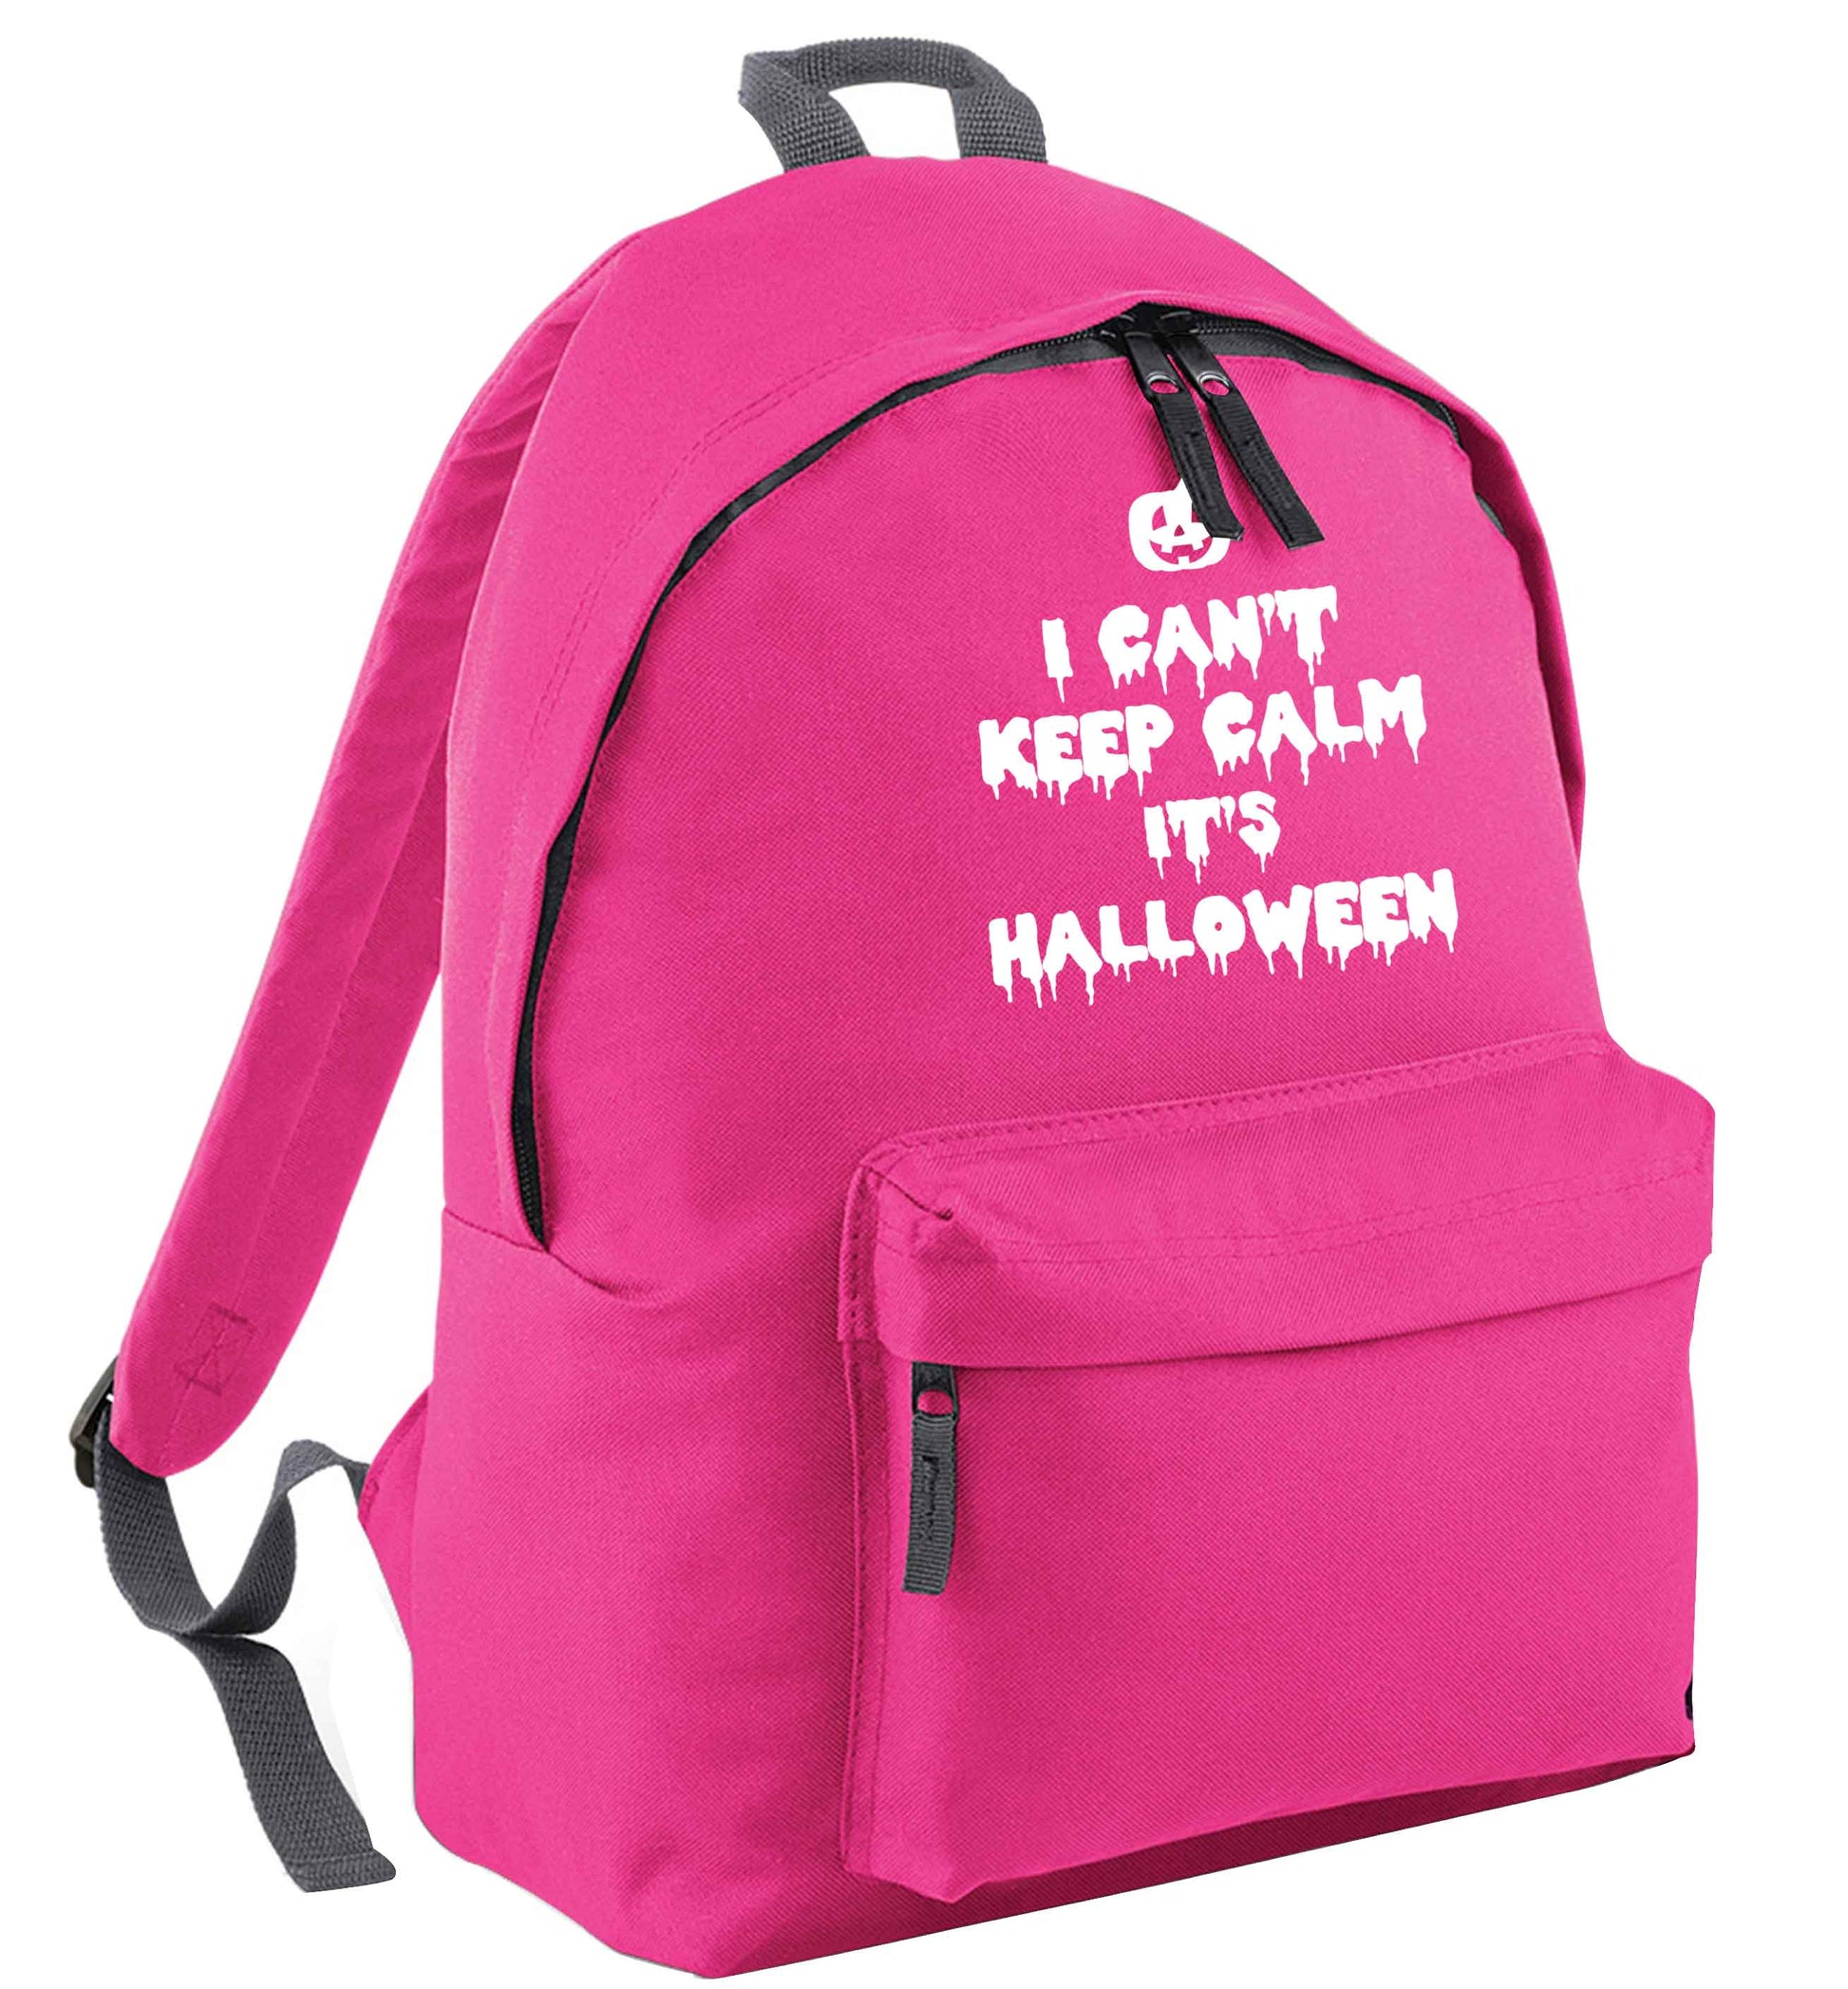 I can't keep calm it's halloween | Children's backpack